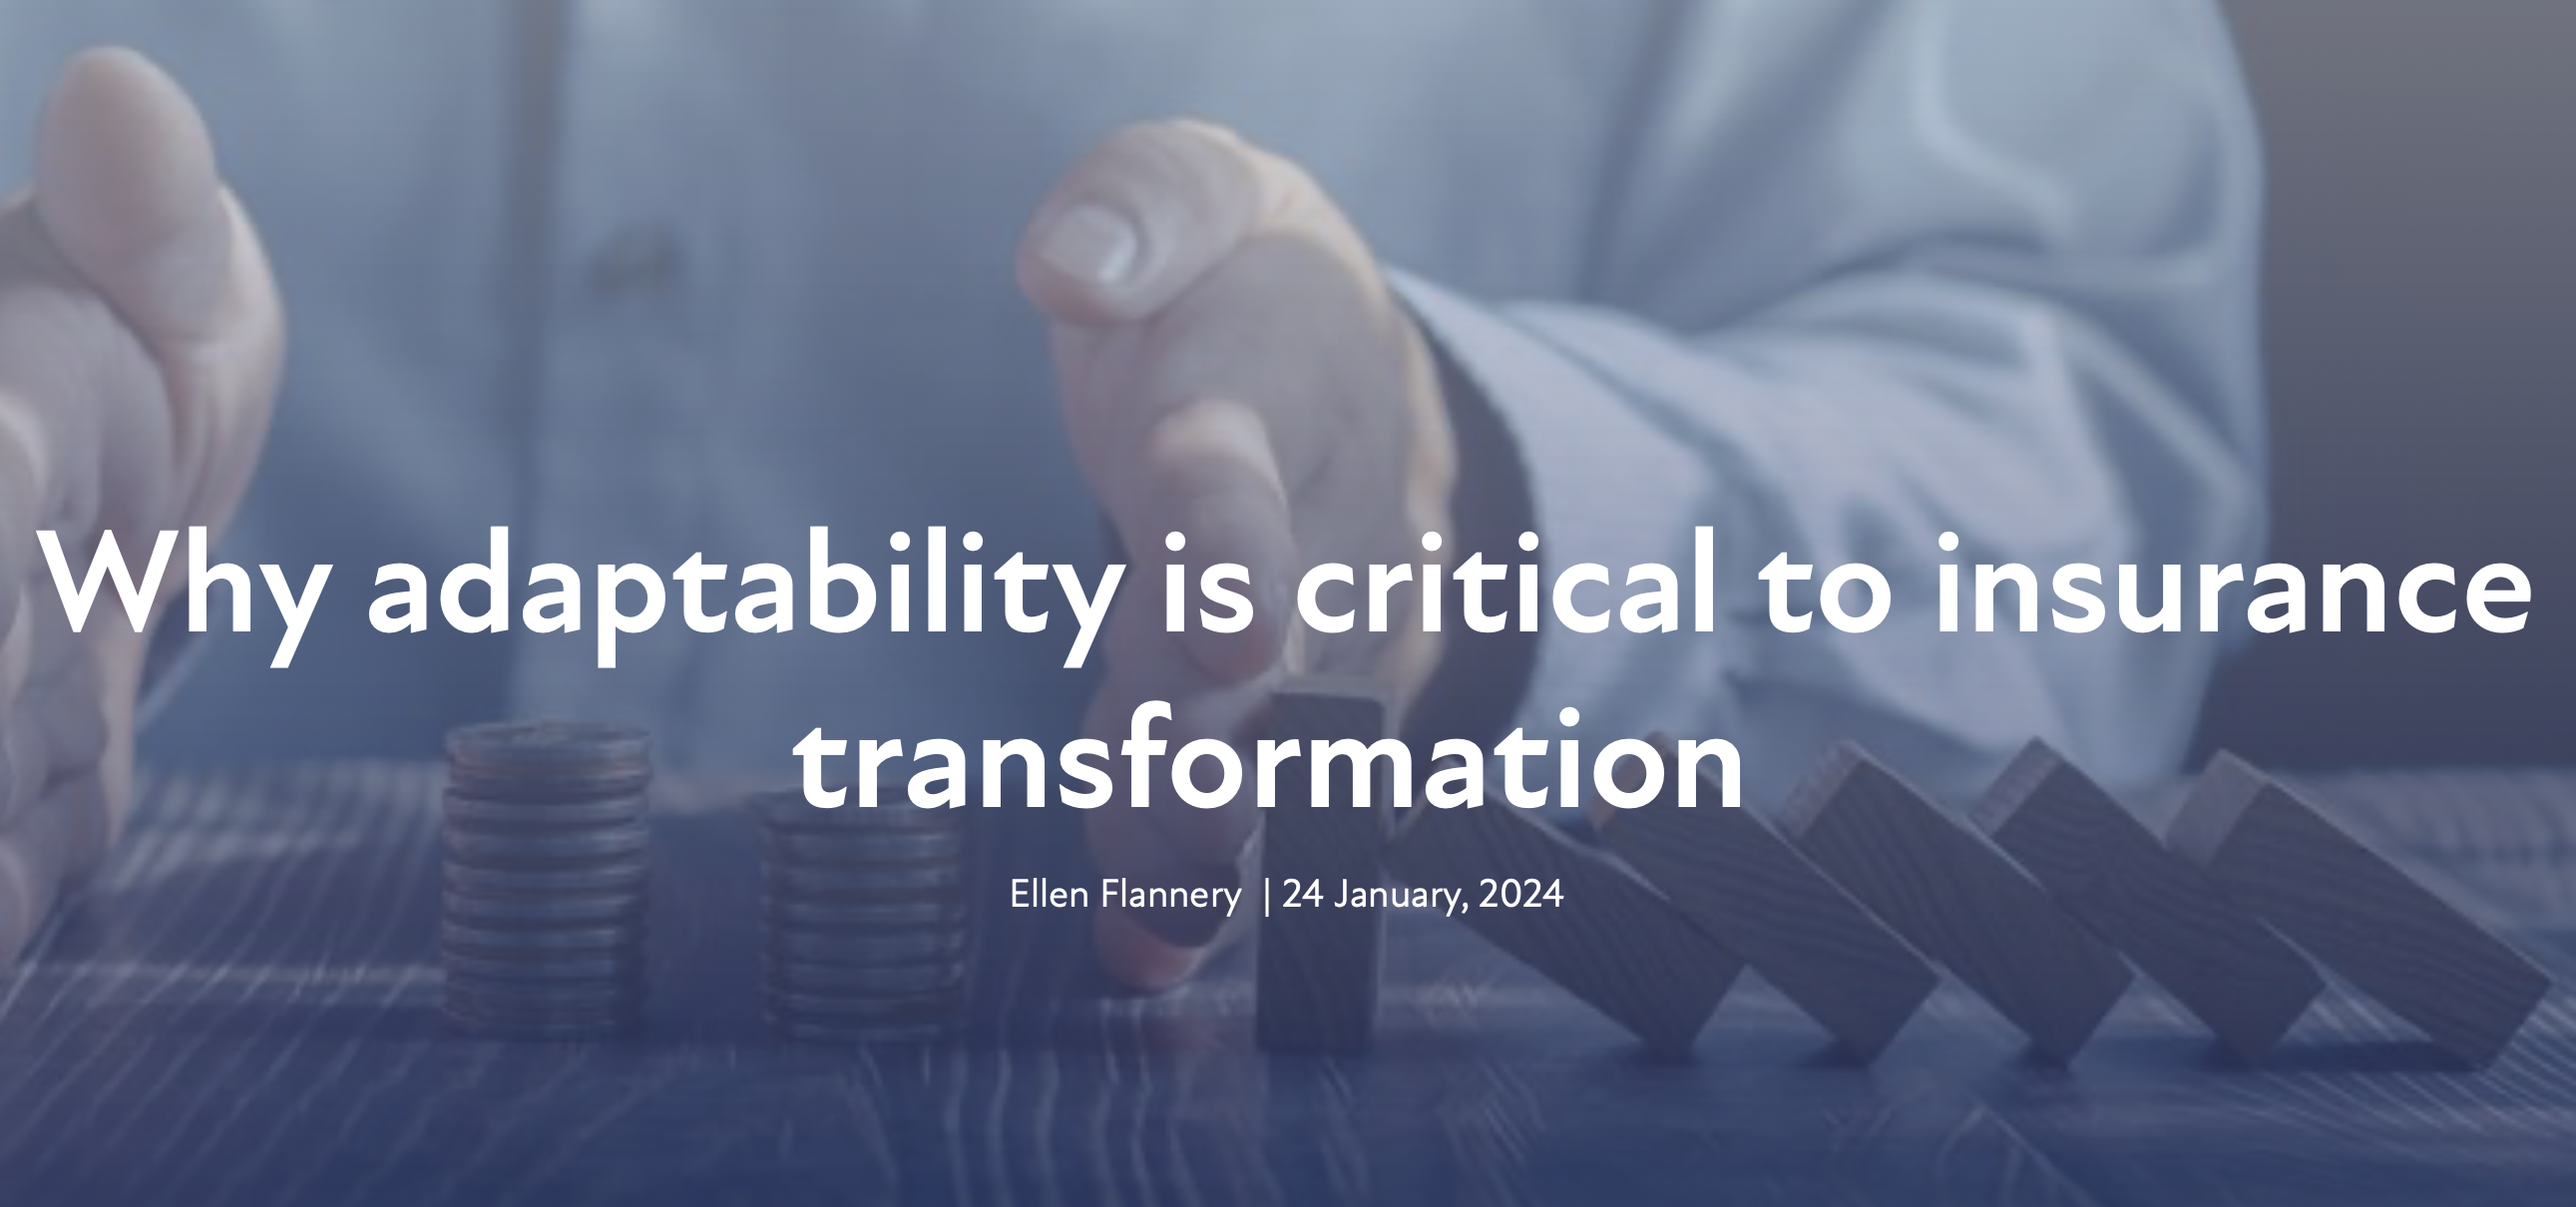 Why Adaptability is Critical to Insurance Transformation